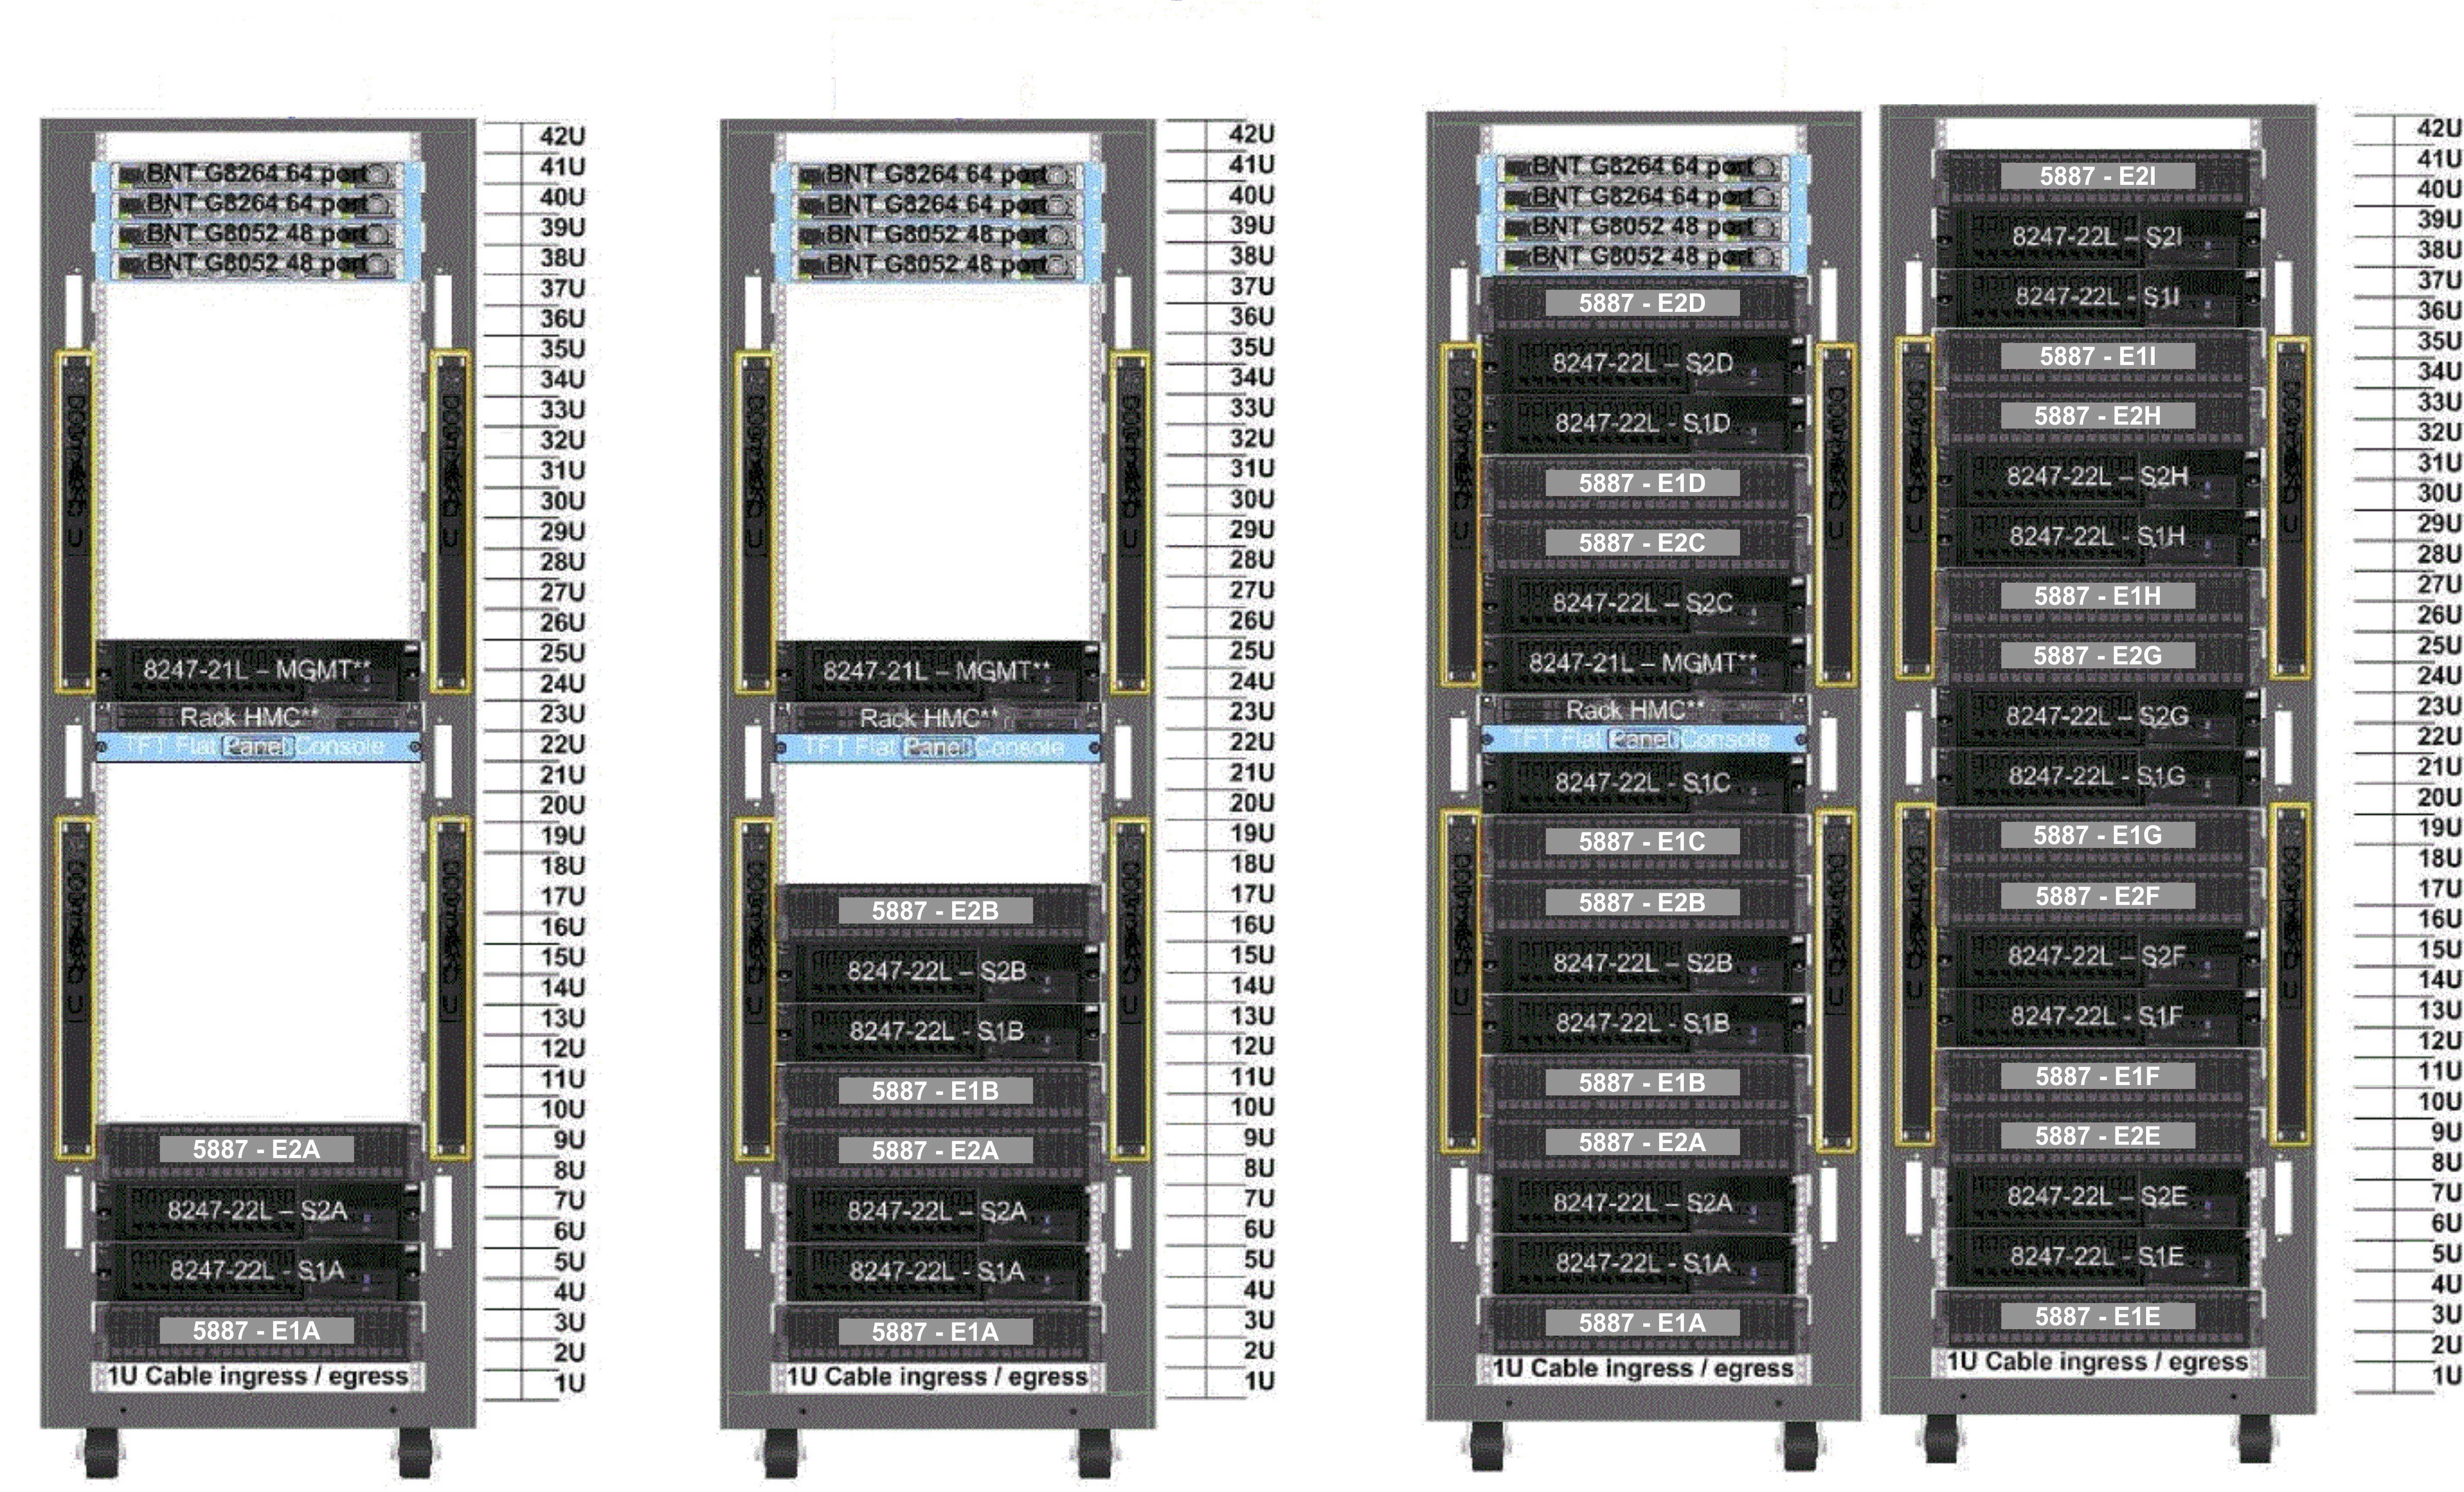 Sample GS2 configurations with one, two, and nine building blocks